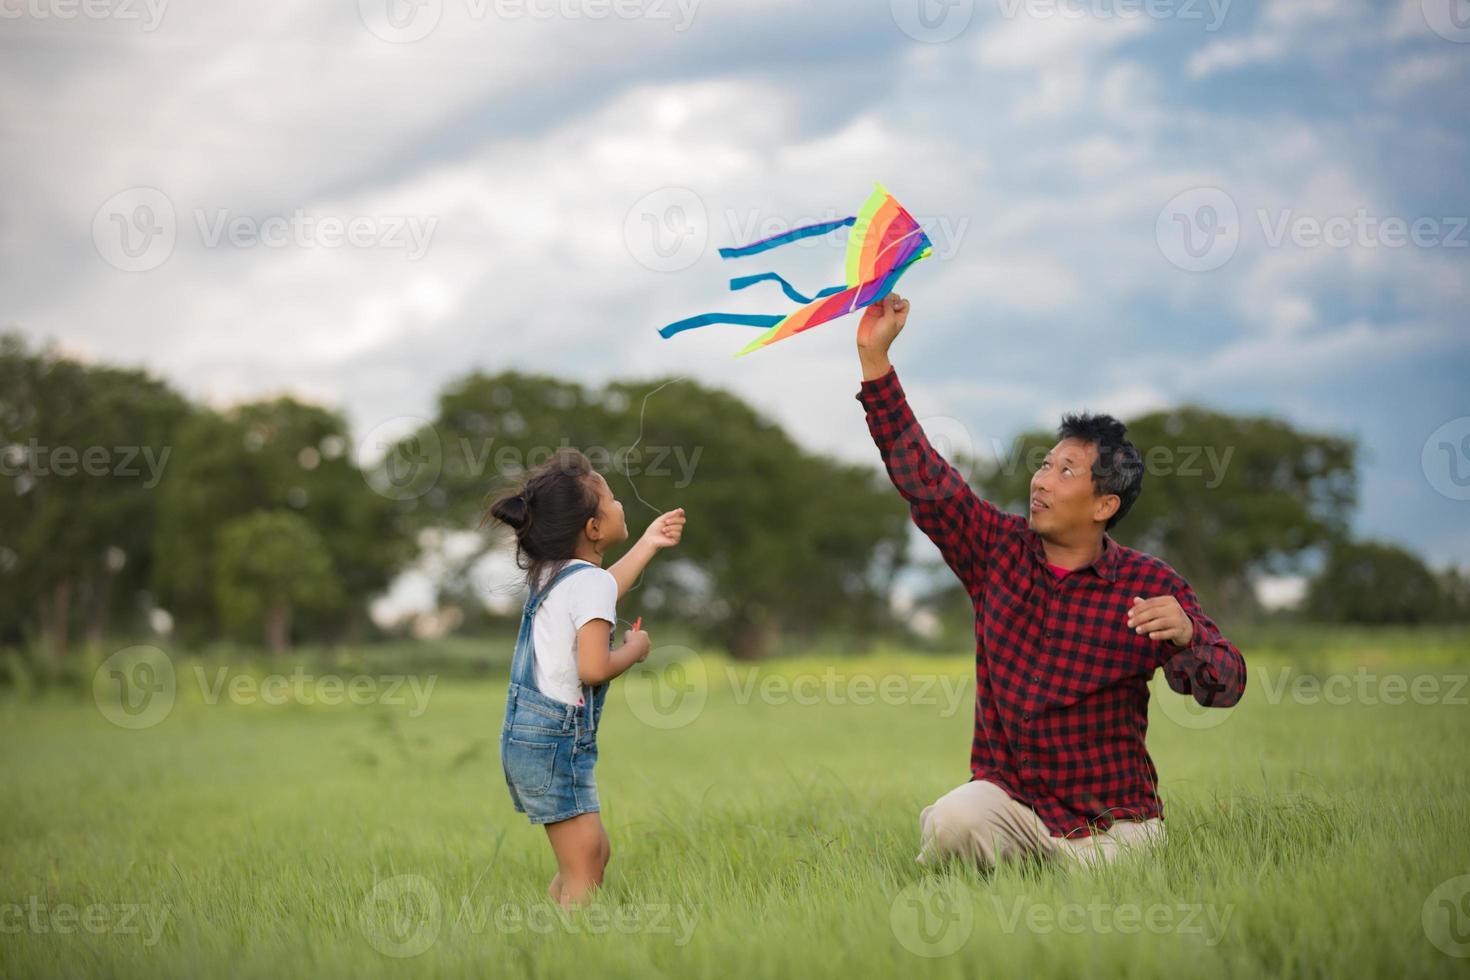 Child and father playing with kite in the park photo